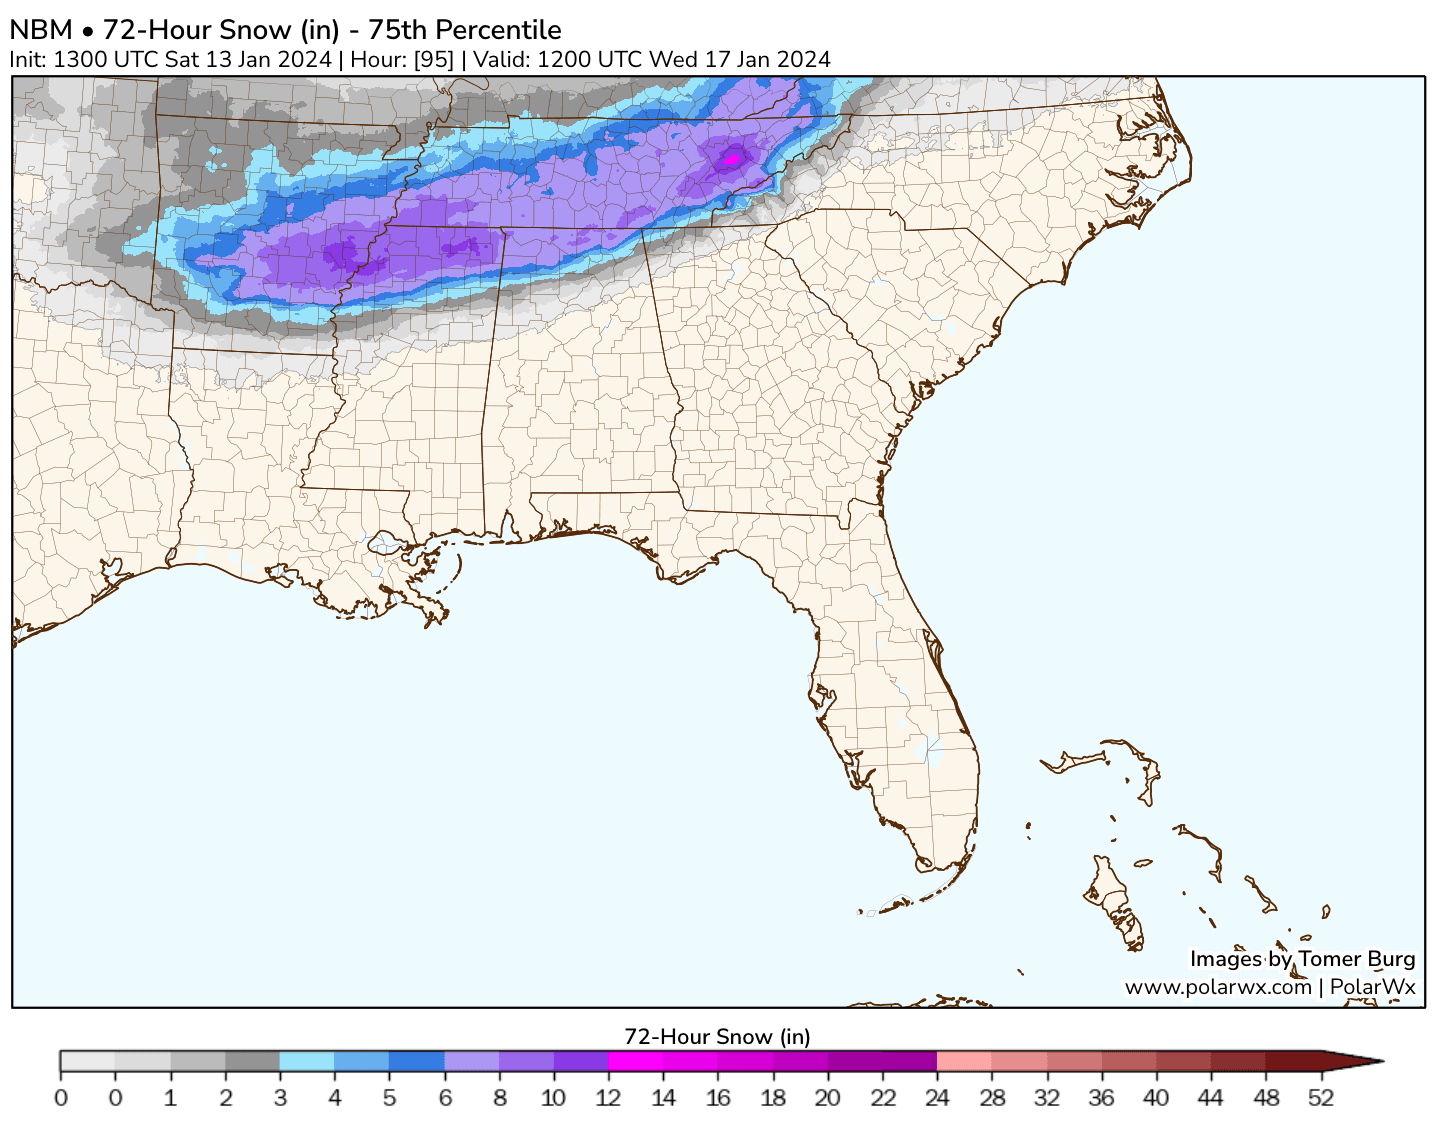 72-Hour Snow Accumulation Forecast (most likely to occur if all snow and at least moderate snow rate))